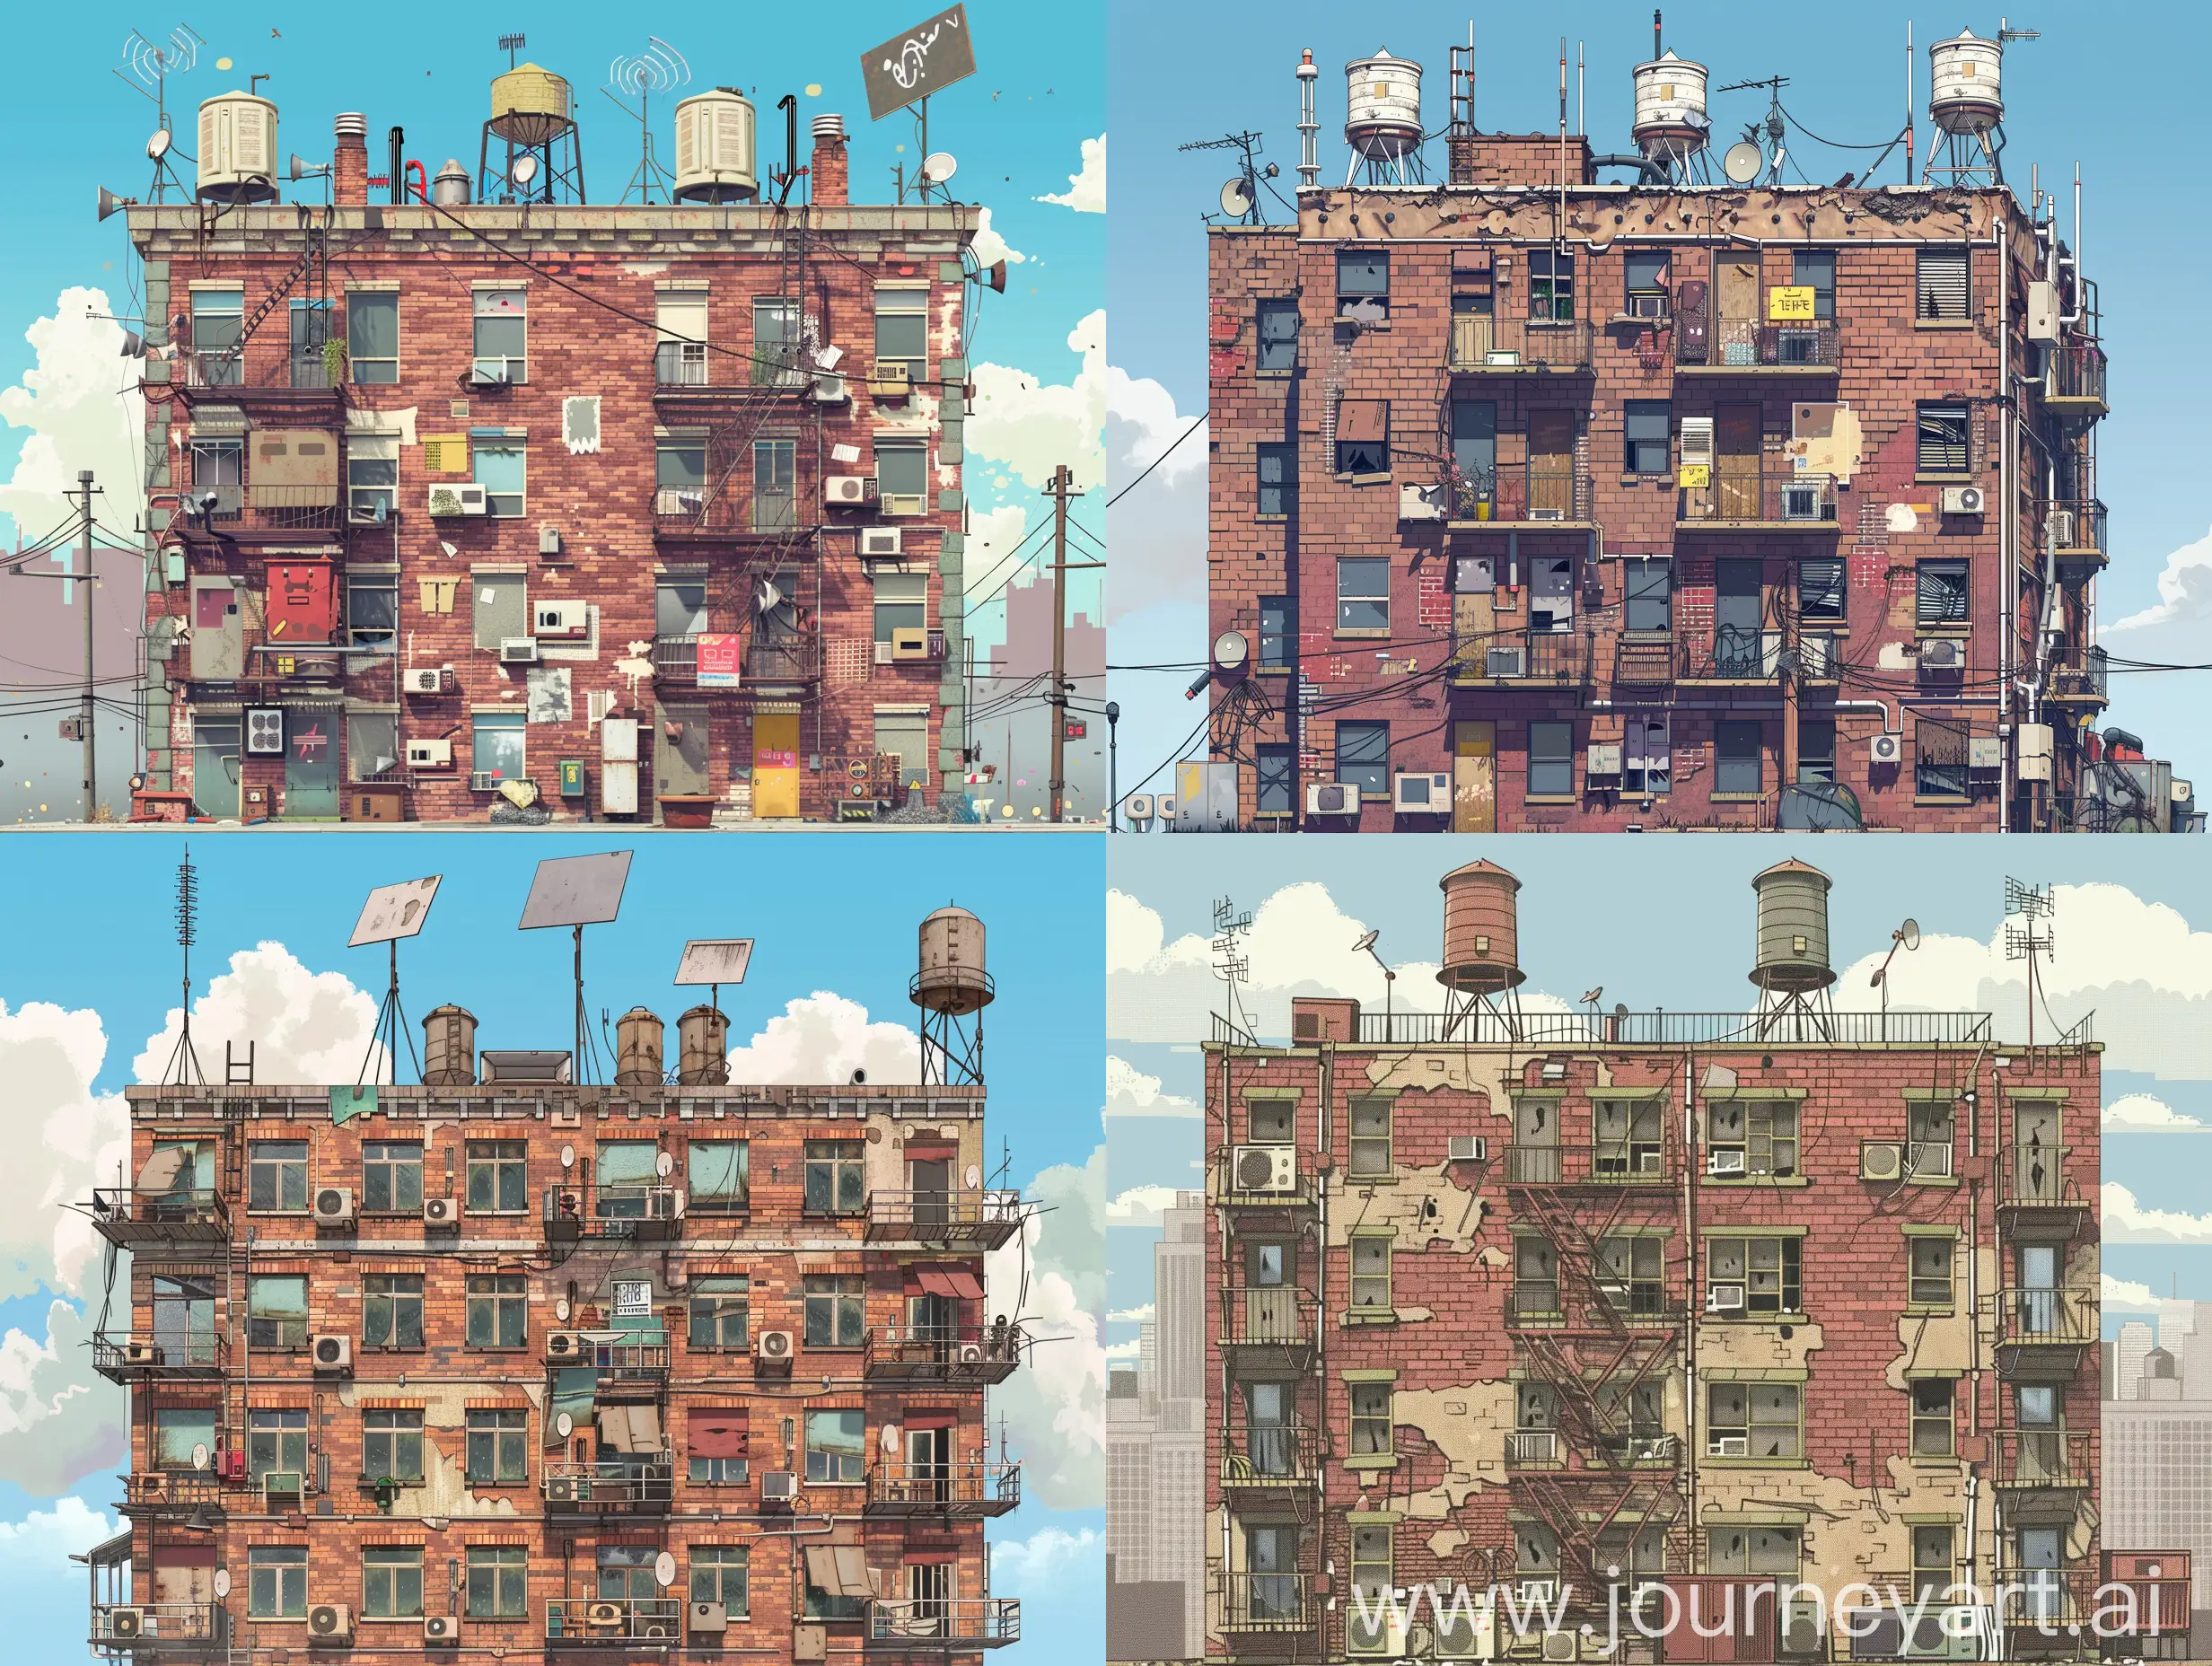 A dilapidated 3-story brick apartment building with TV antennas, water towers and air conditioners in 2D